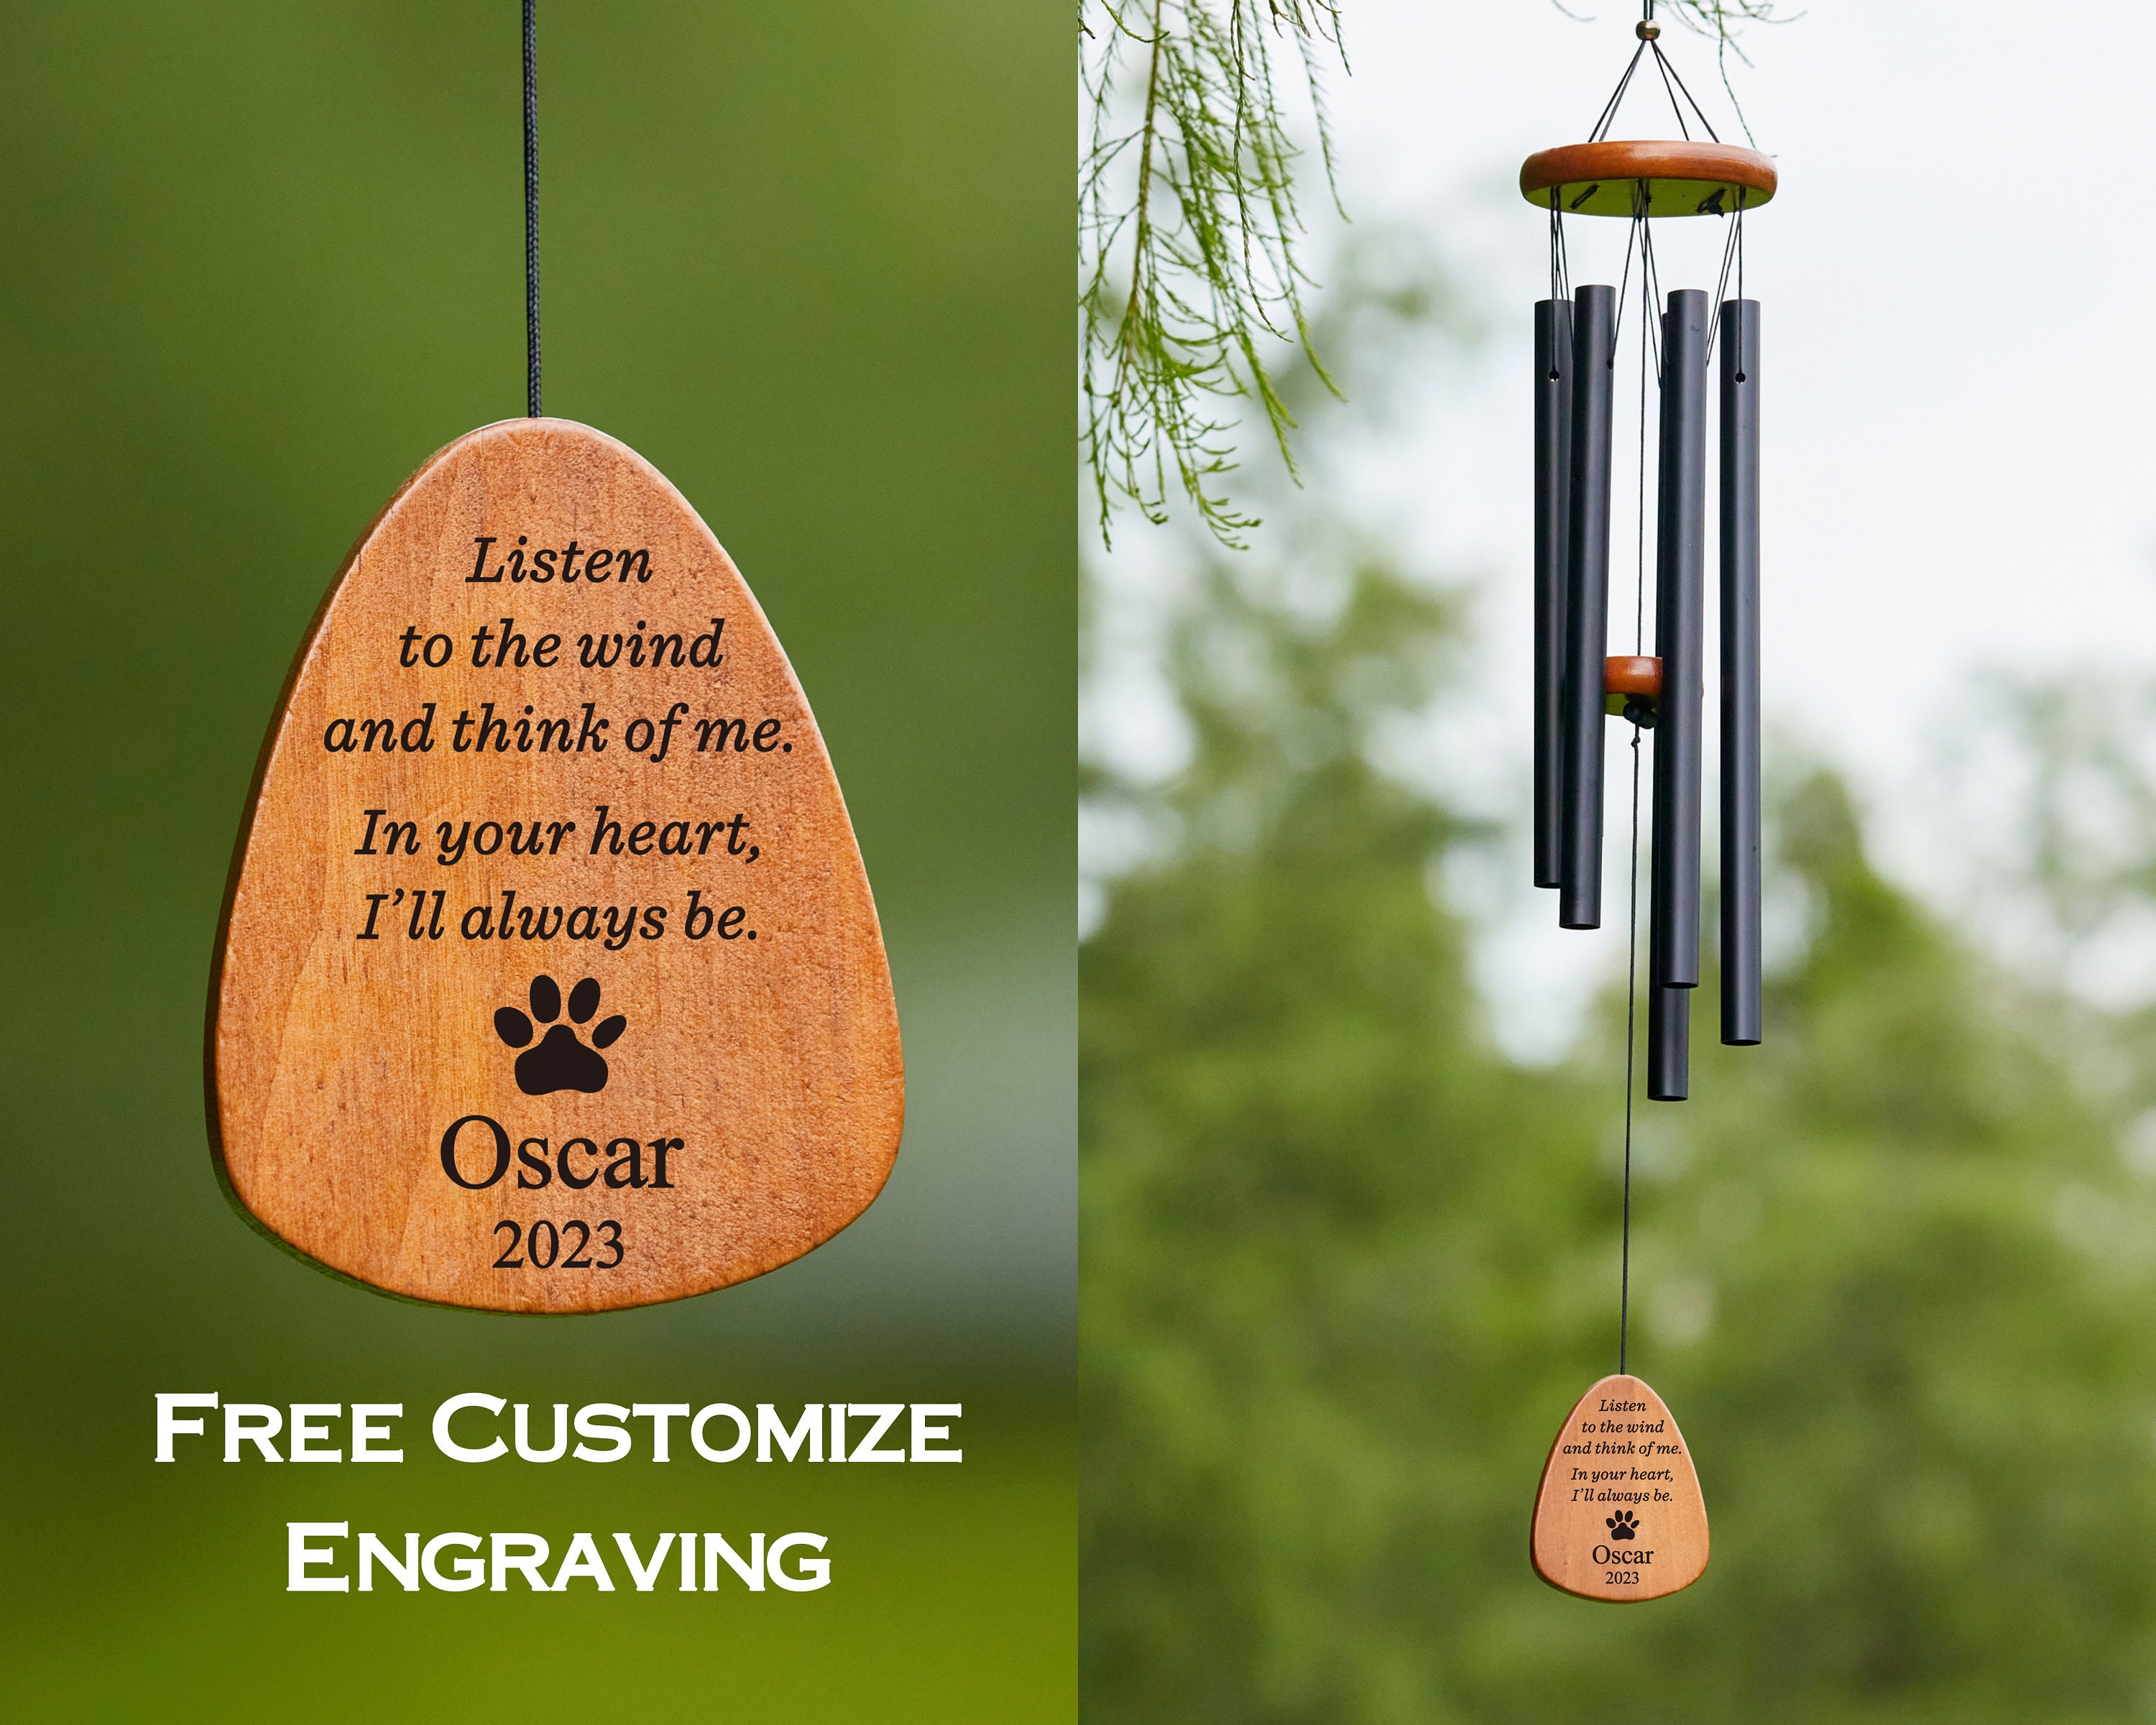 Outdoor Wind Chimes 